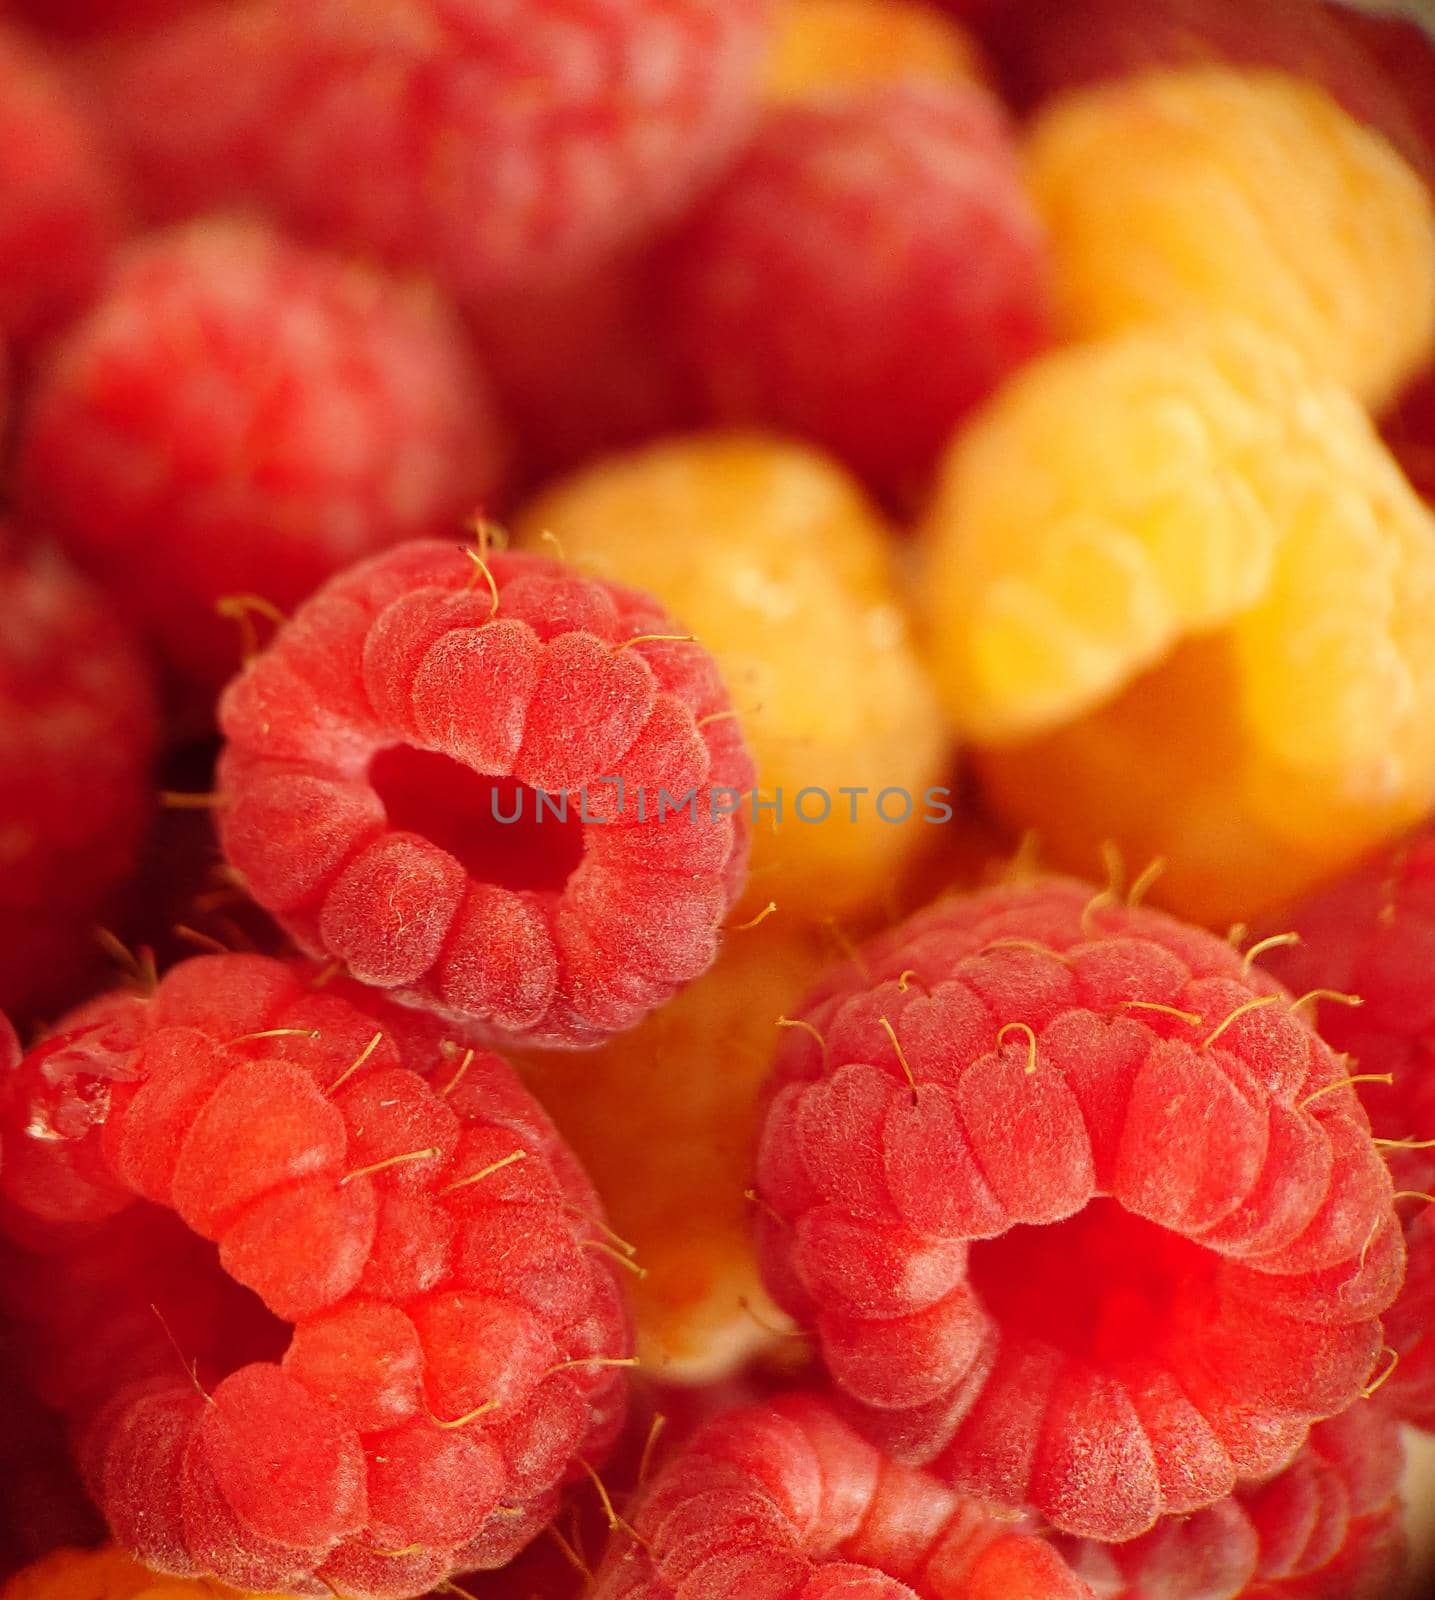 Macrophotography.A handful of ripe garden raspberries of red-yellow color.Texture or background